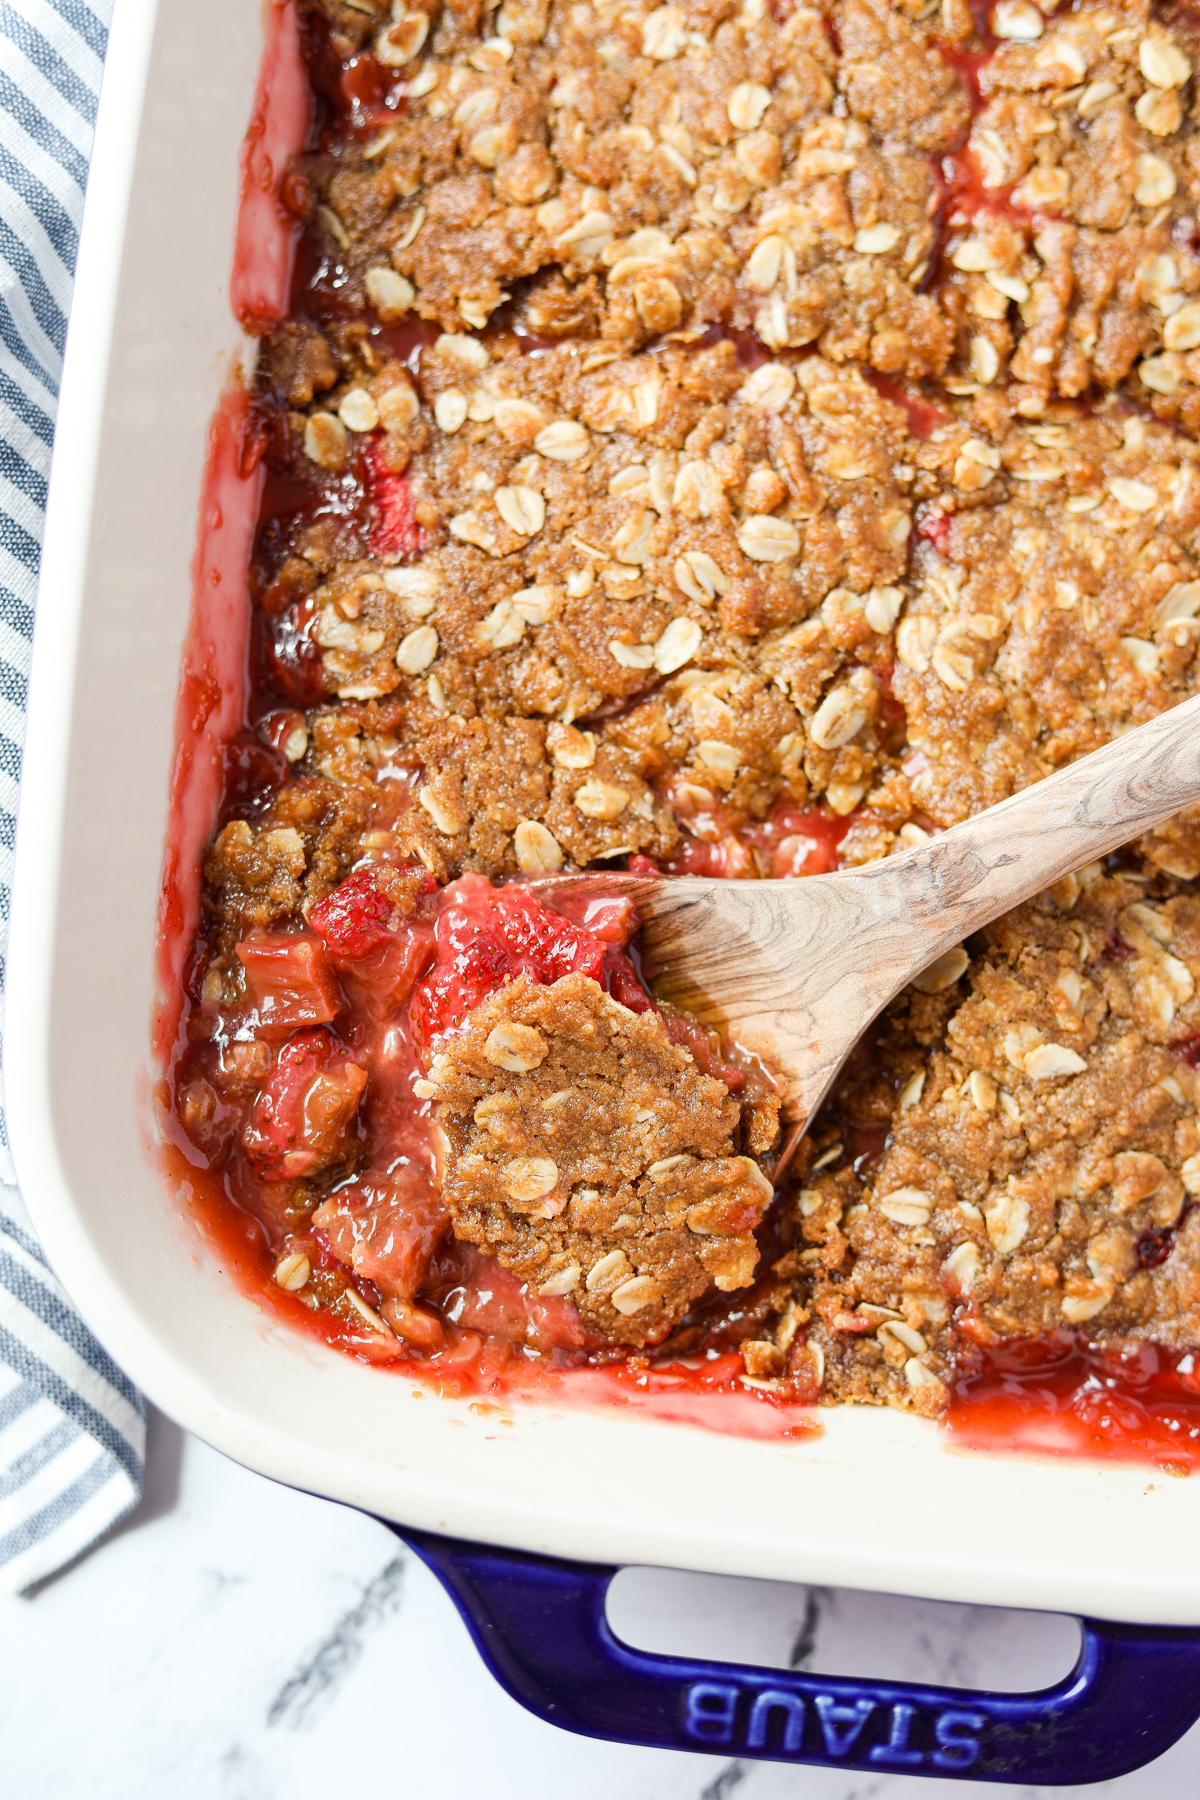 A baking dish filled with a fruit crisp made with rhubarb and strawberries.